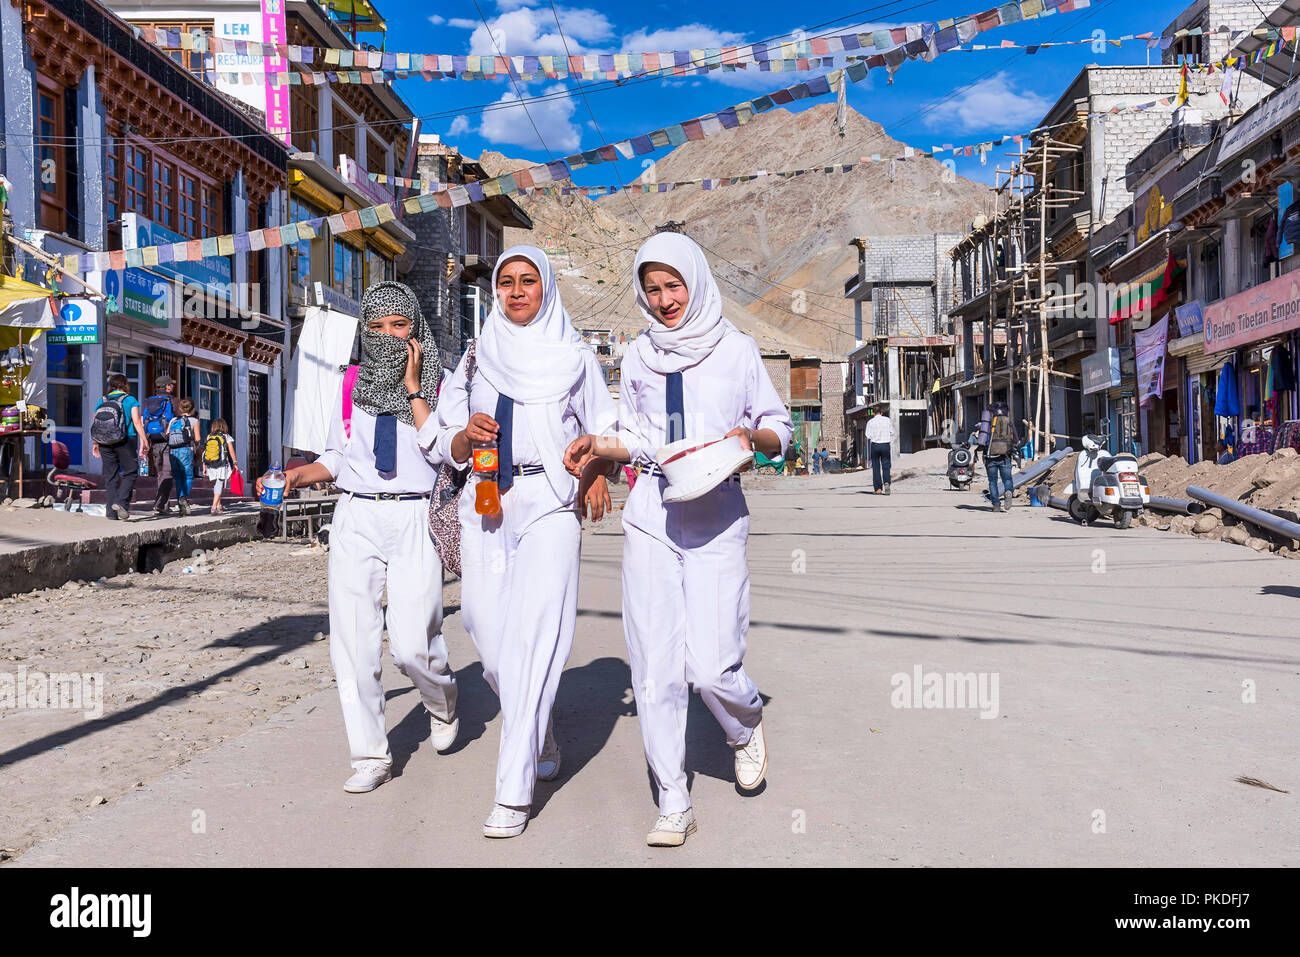 Leh, India - August 15, 2015: Three young muslim girls walking in a street of Leh, the capital of the Himalayan kingdom of Ladakh Stock Photo